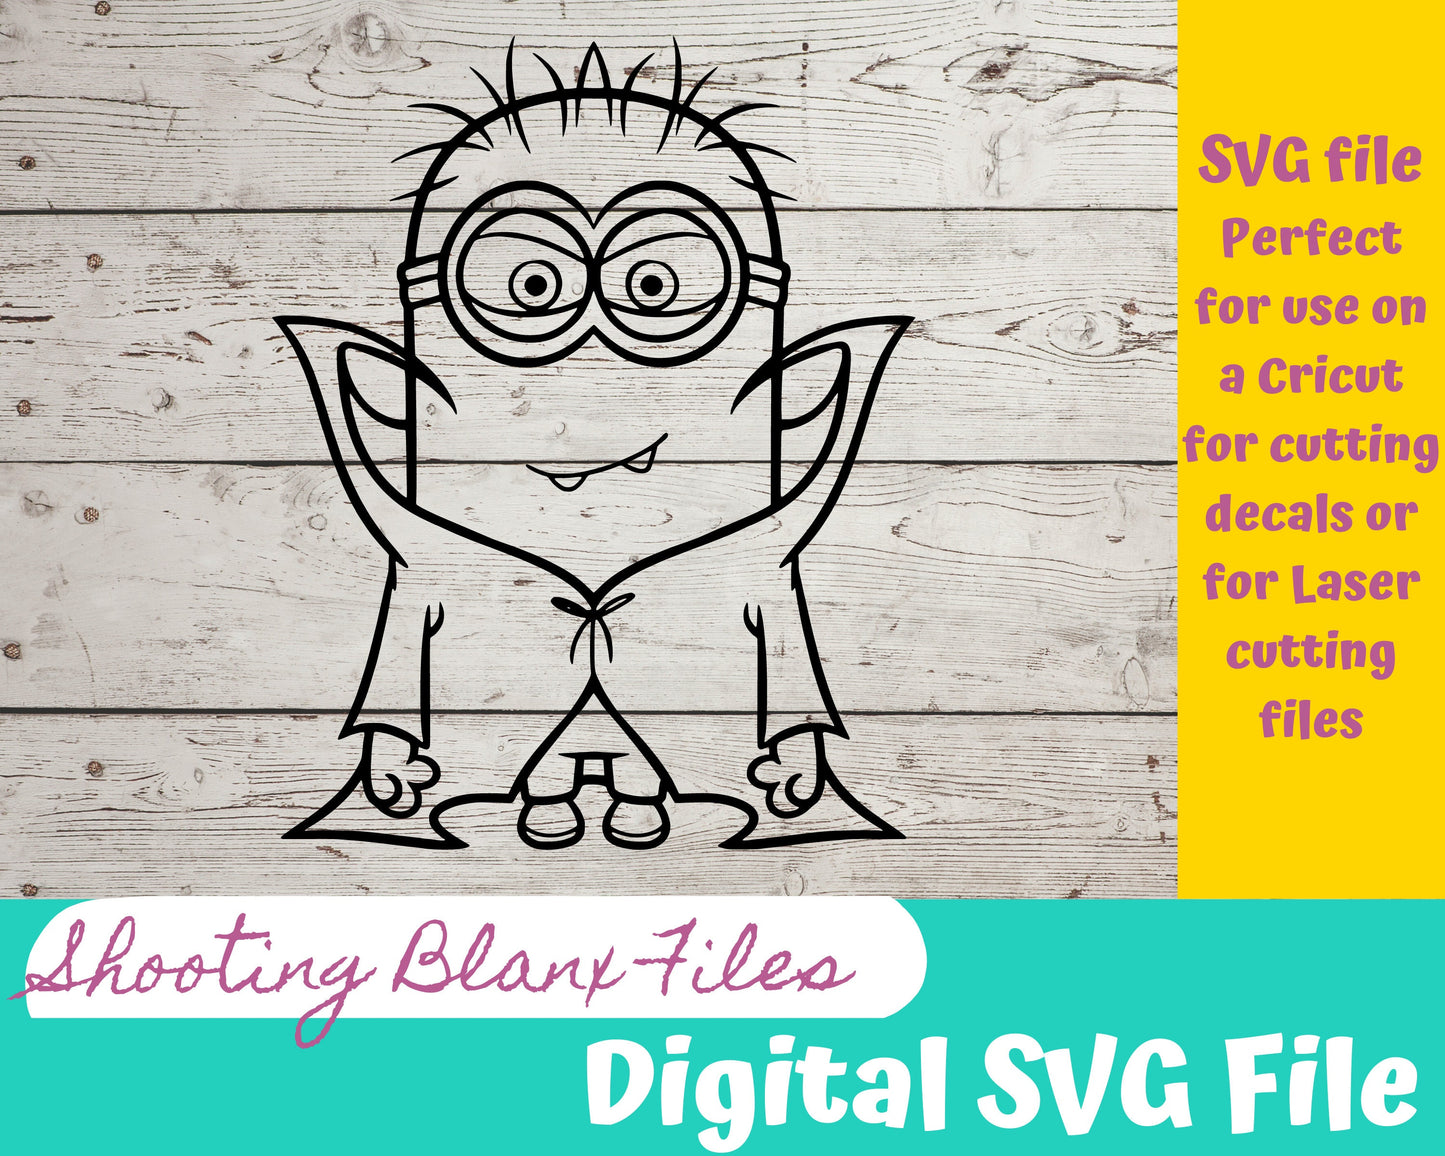 Yellow worker SVG file perfect for Cricut, Cameo, or Silhouette also for laser engraving Glowforge, Cartoon, Banana, vampire